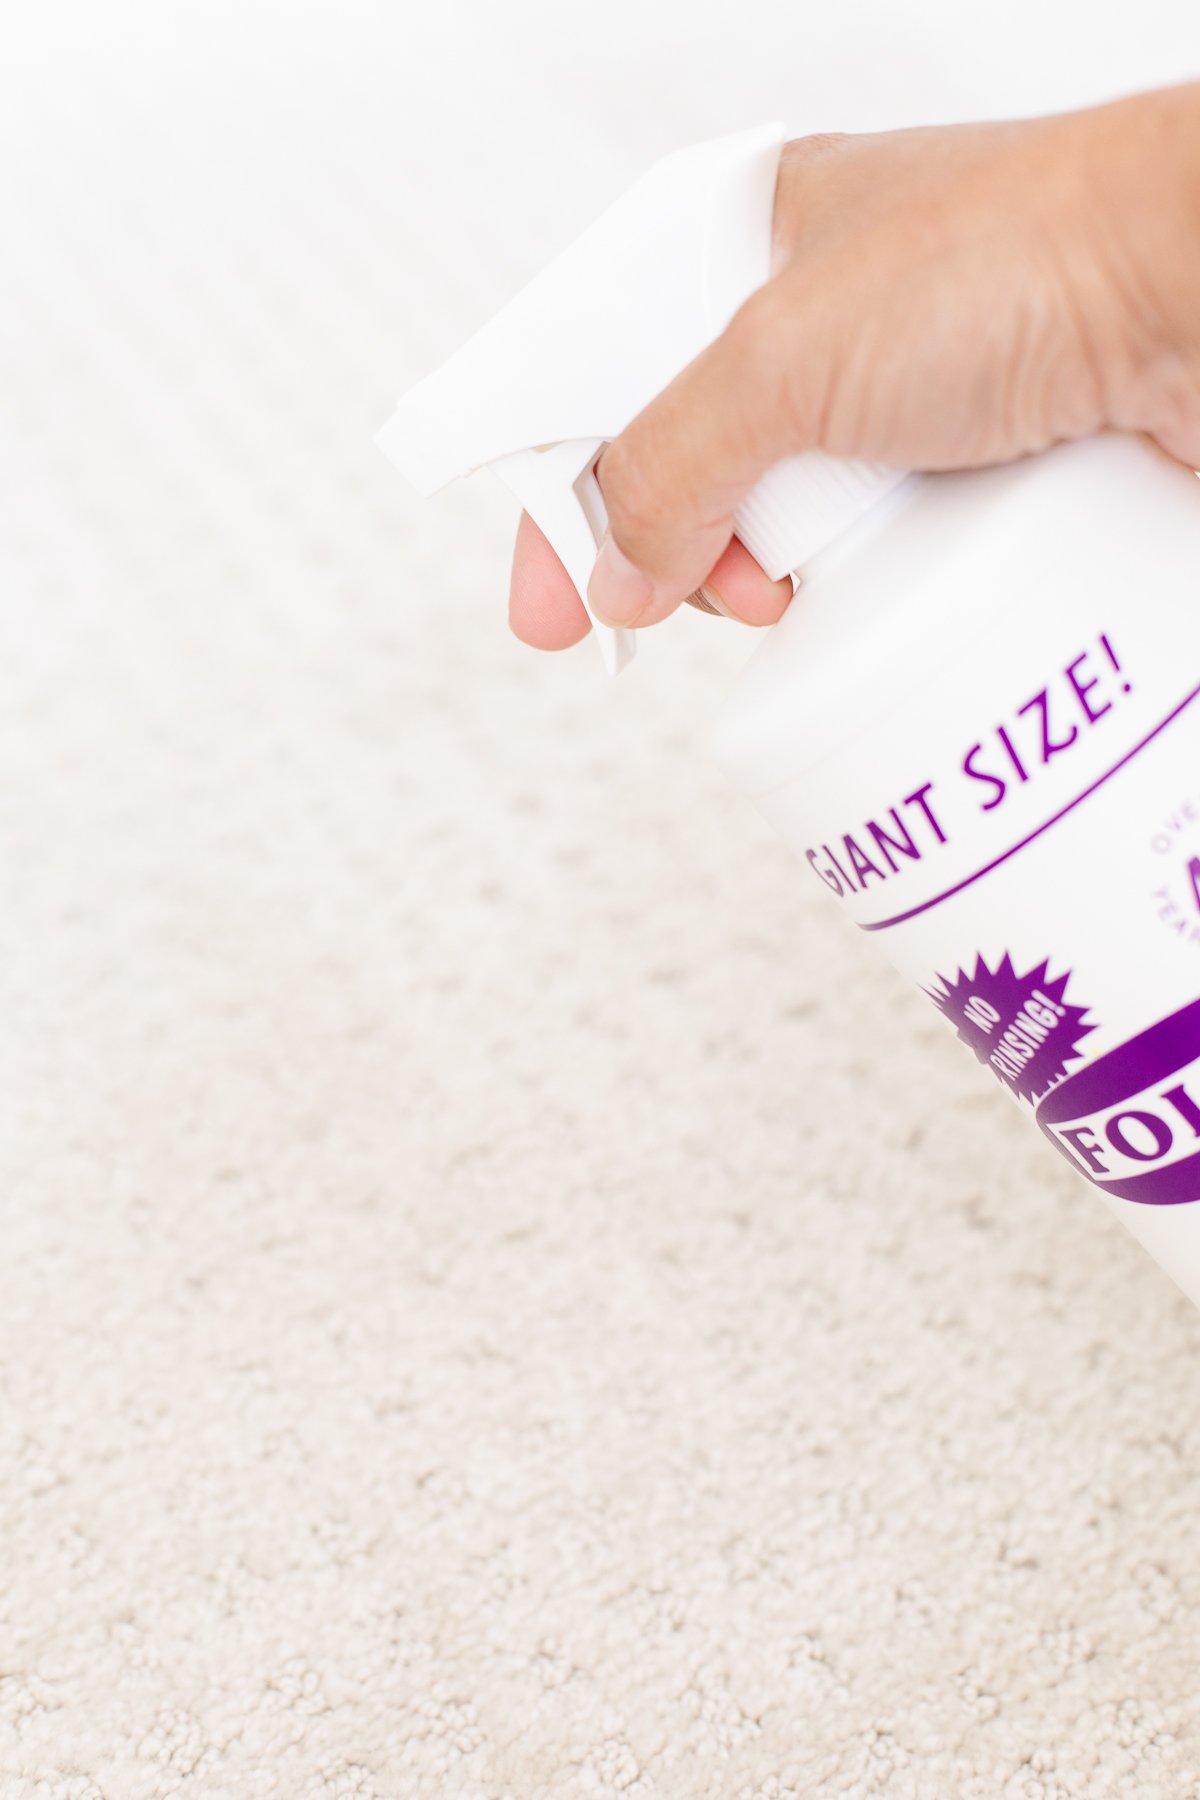 A person is spraying a bottle of Folex carpet cleaner on a carpet.